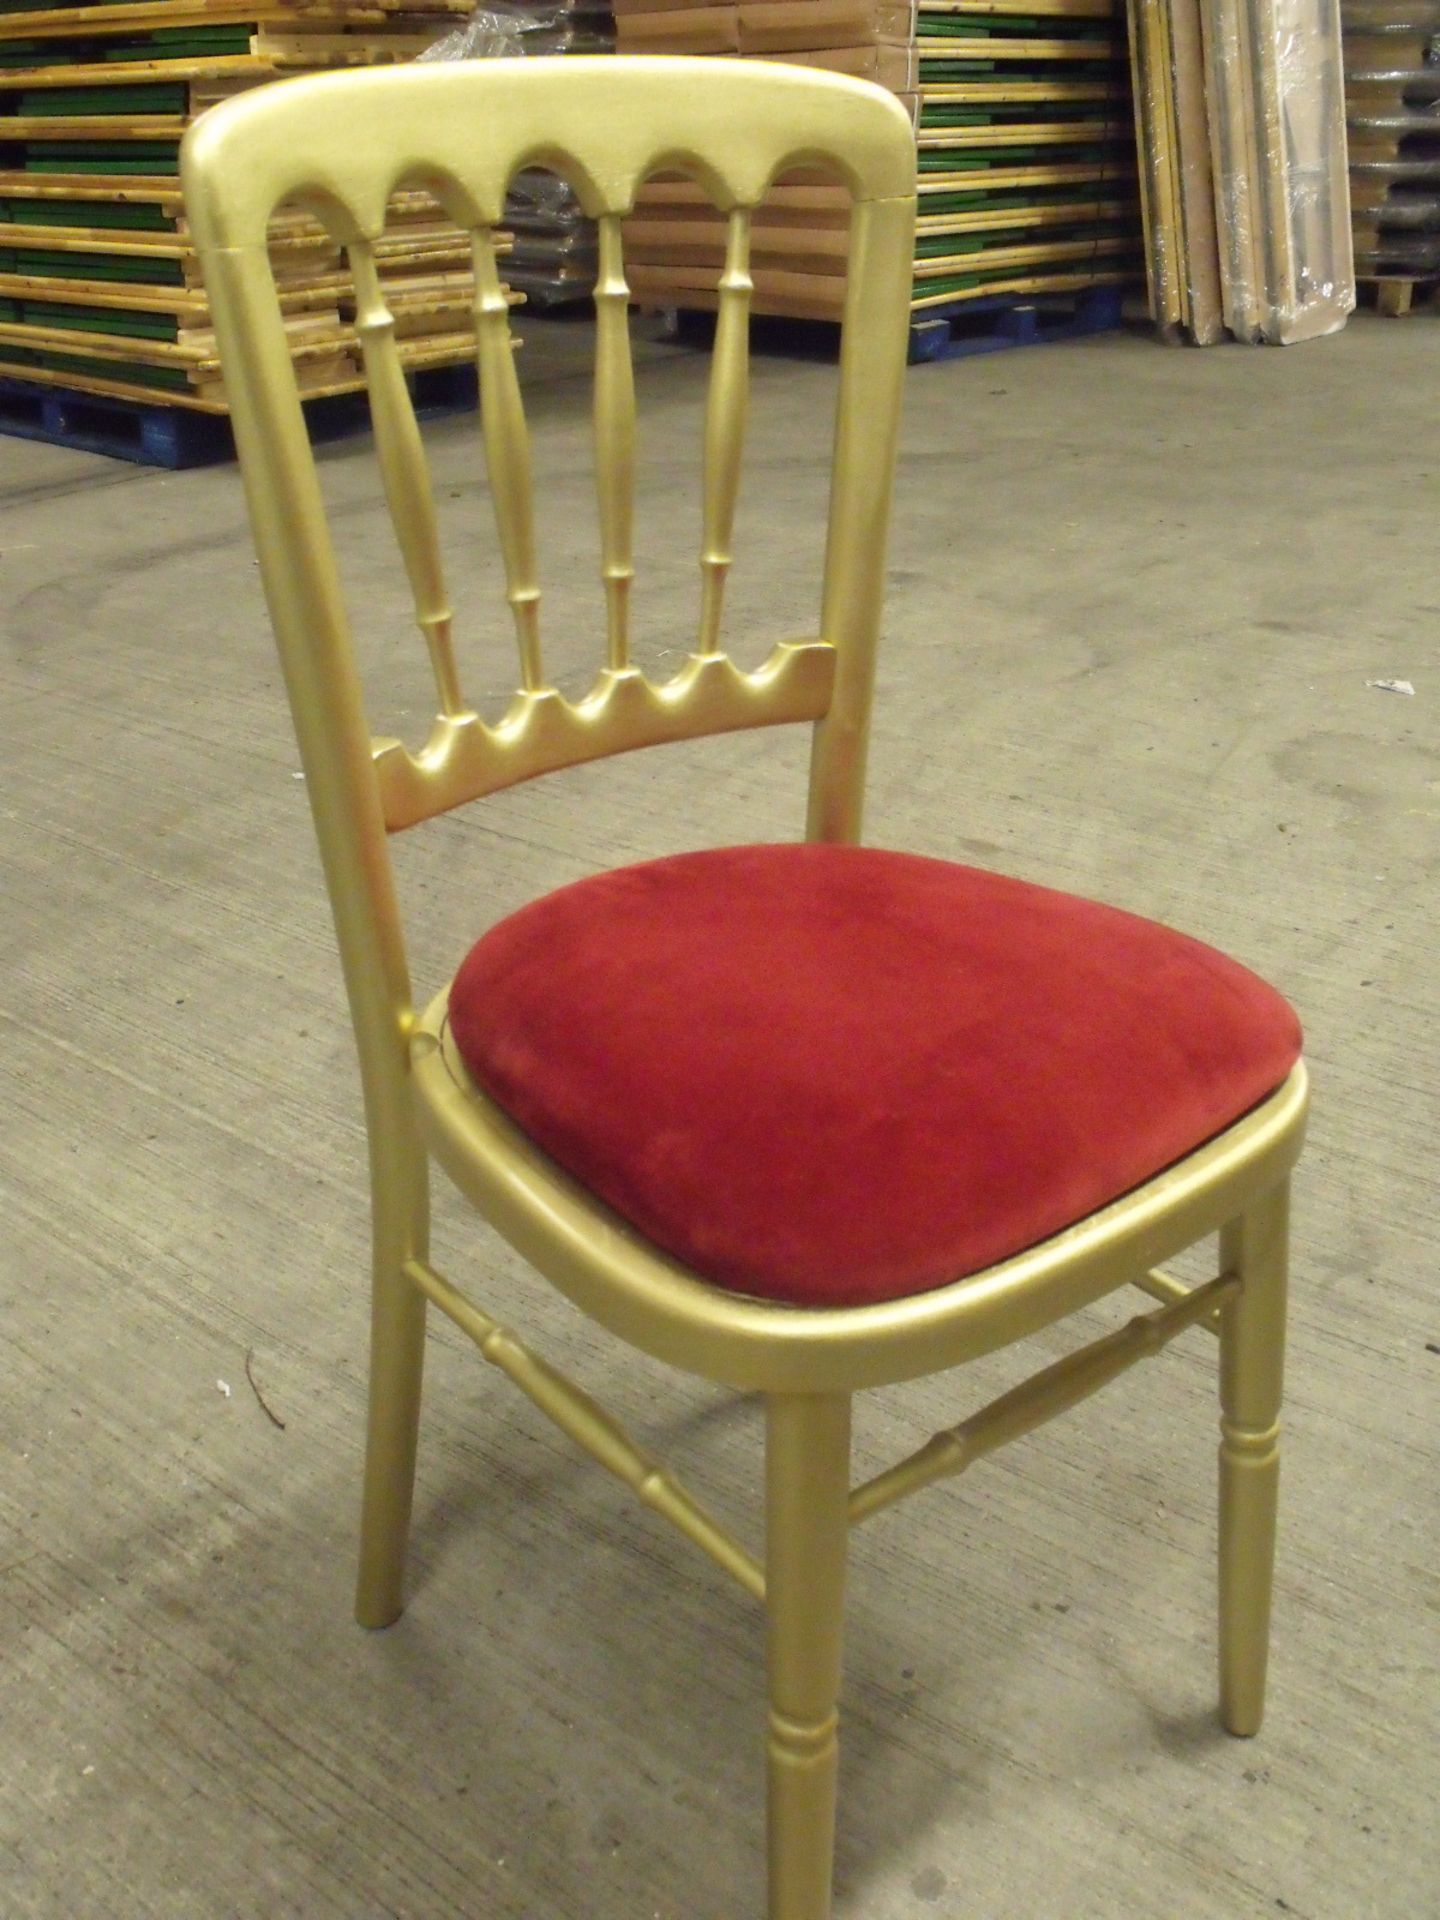 59 x cheltenham style stacking wooden banqueting chairs recently resprayed burgundy Velcro seat pad